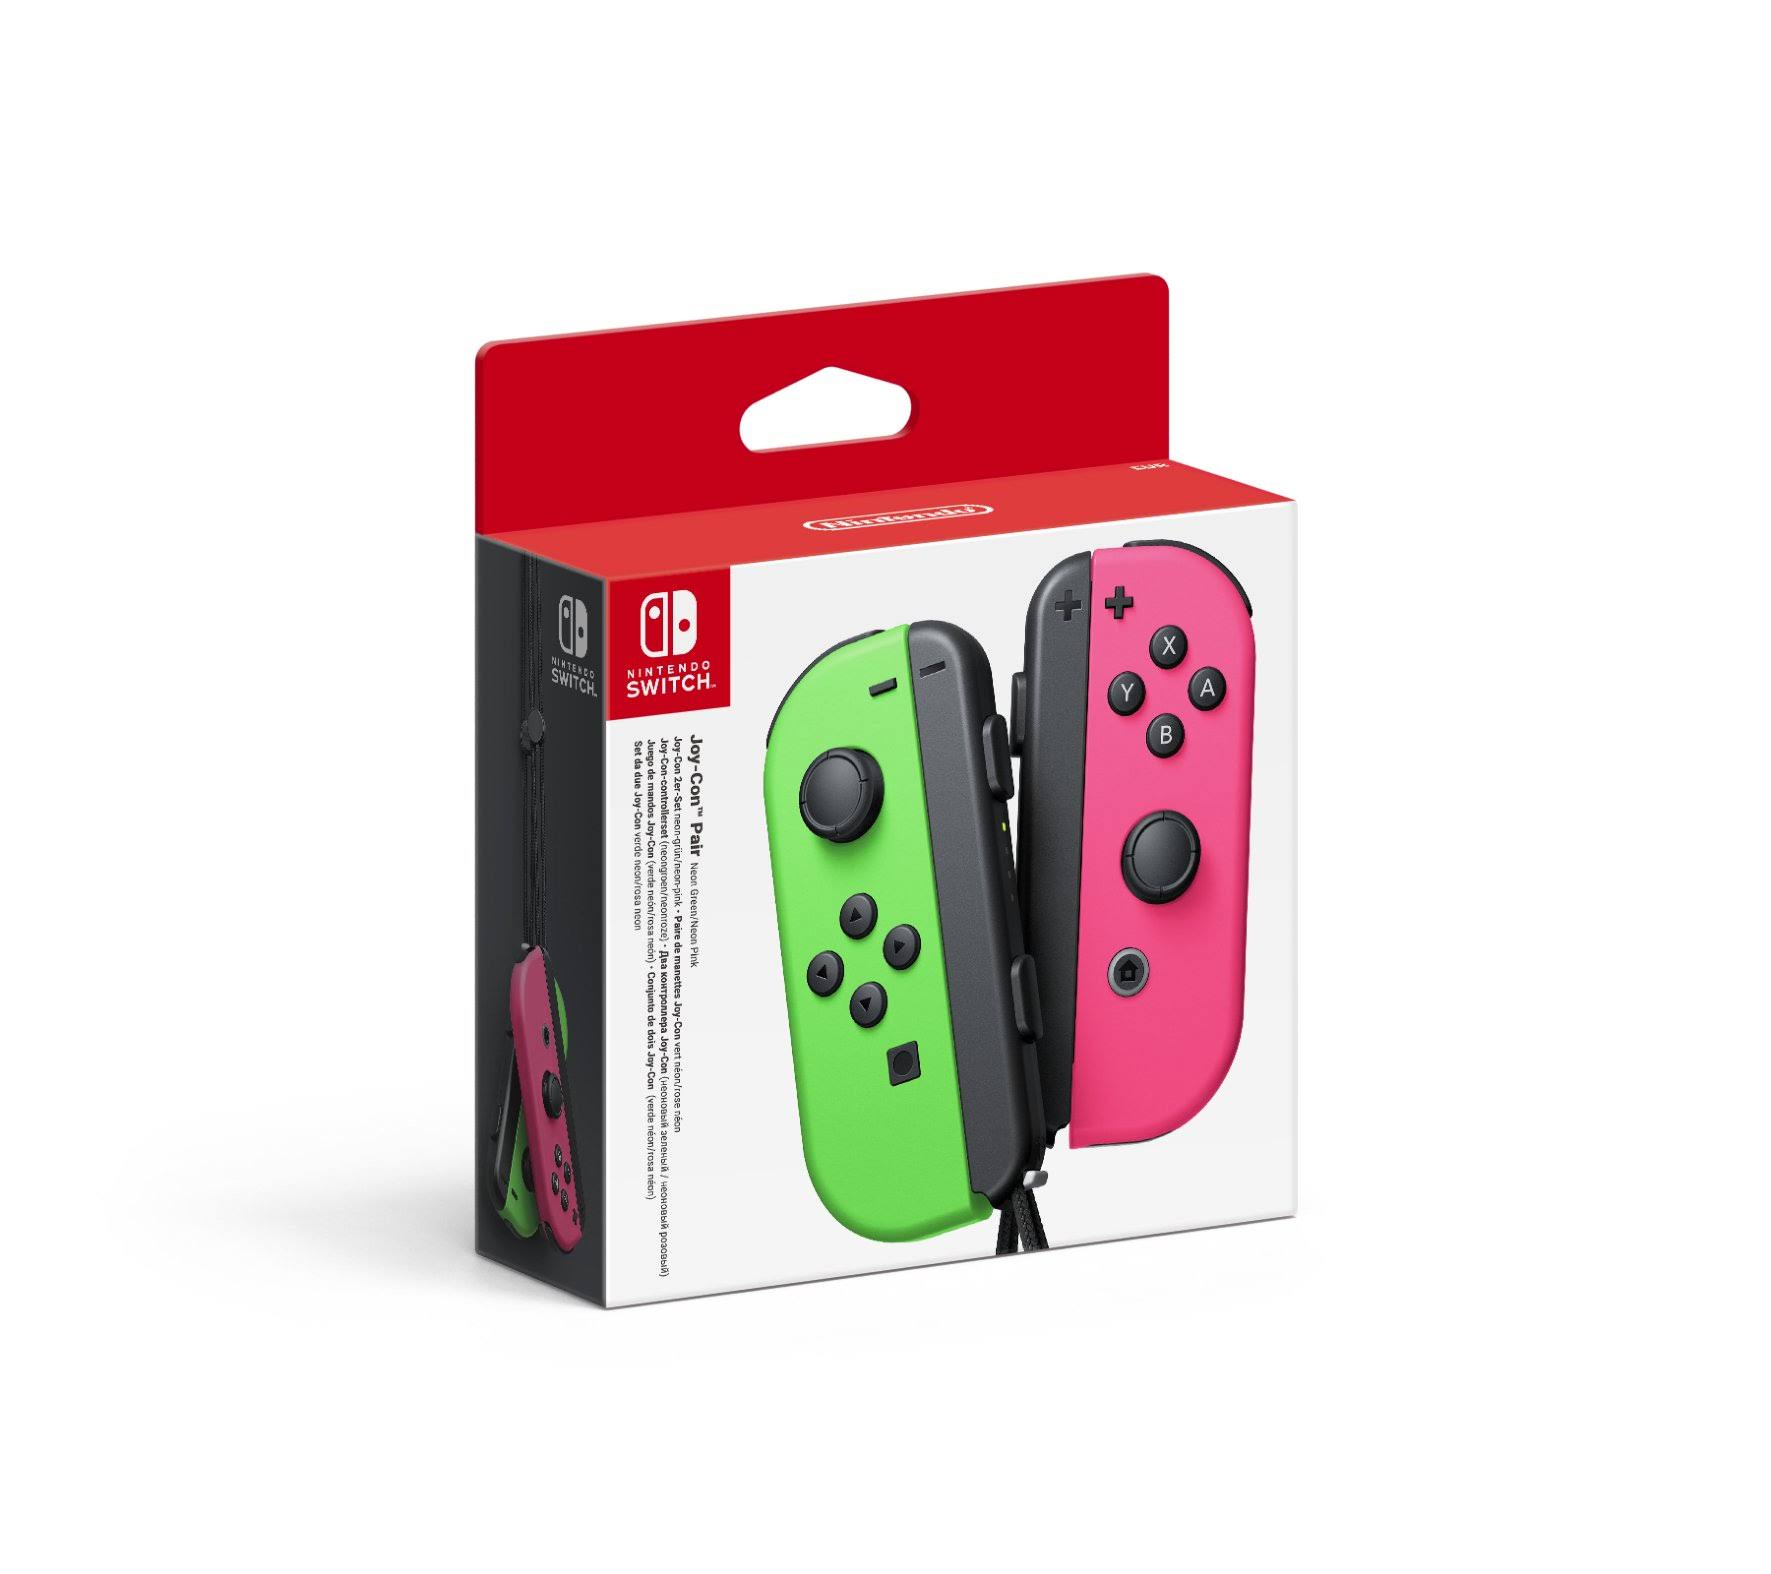 Nintendo Switch Joy-Con Controllers - Neon Green And Pink, Pair